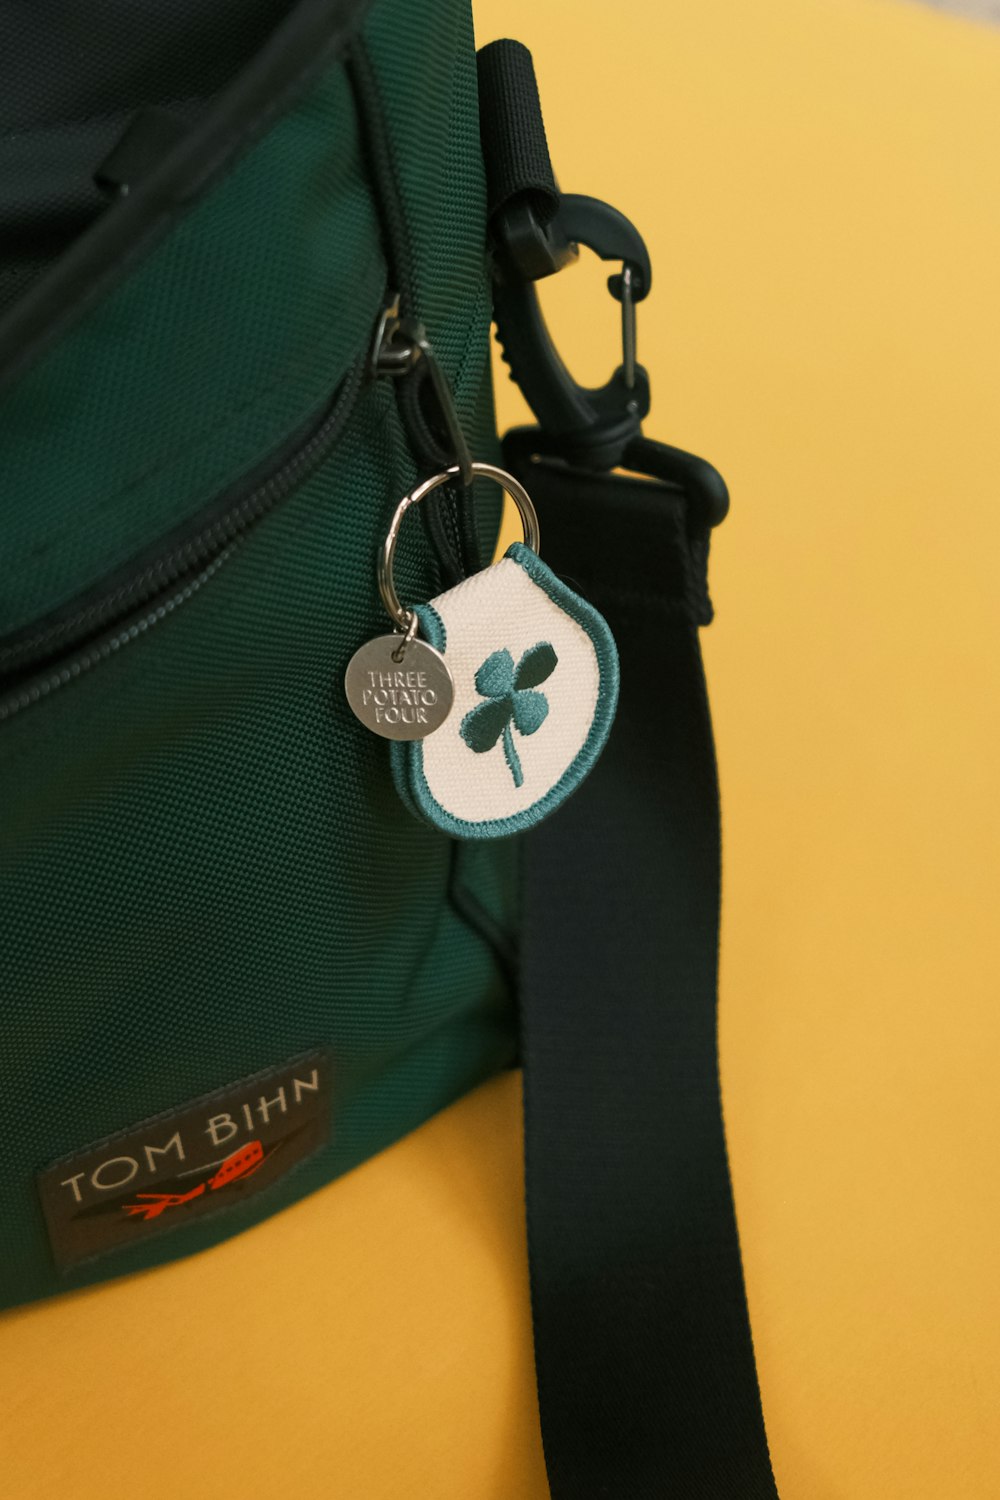 a green bag with a black strap and a clover keychain